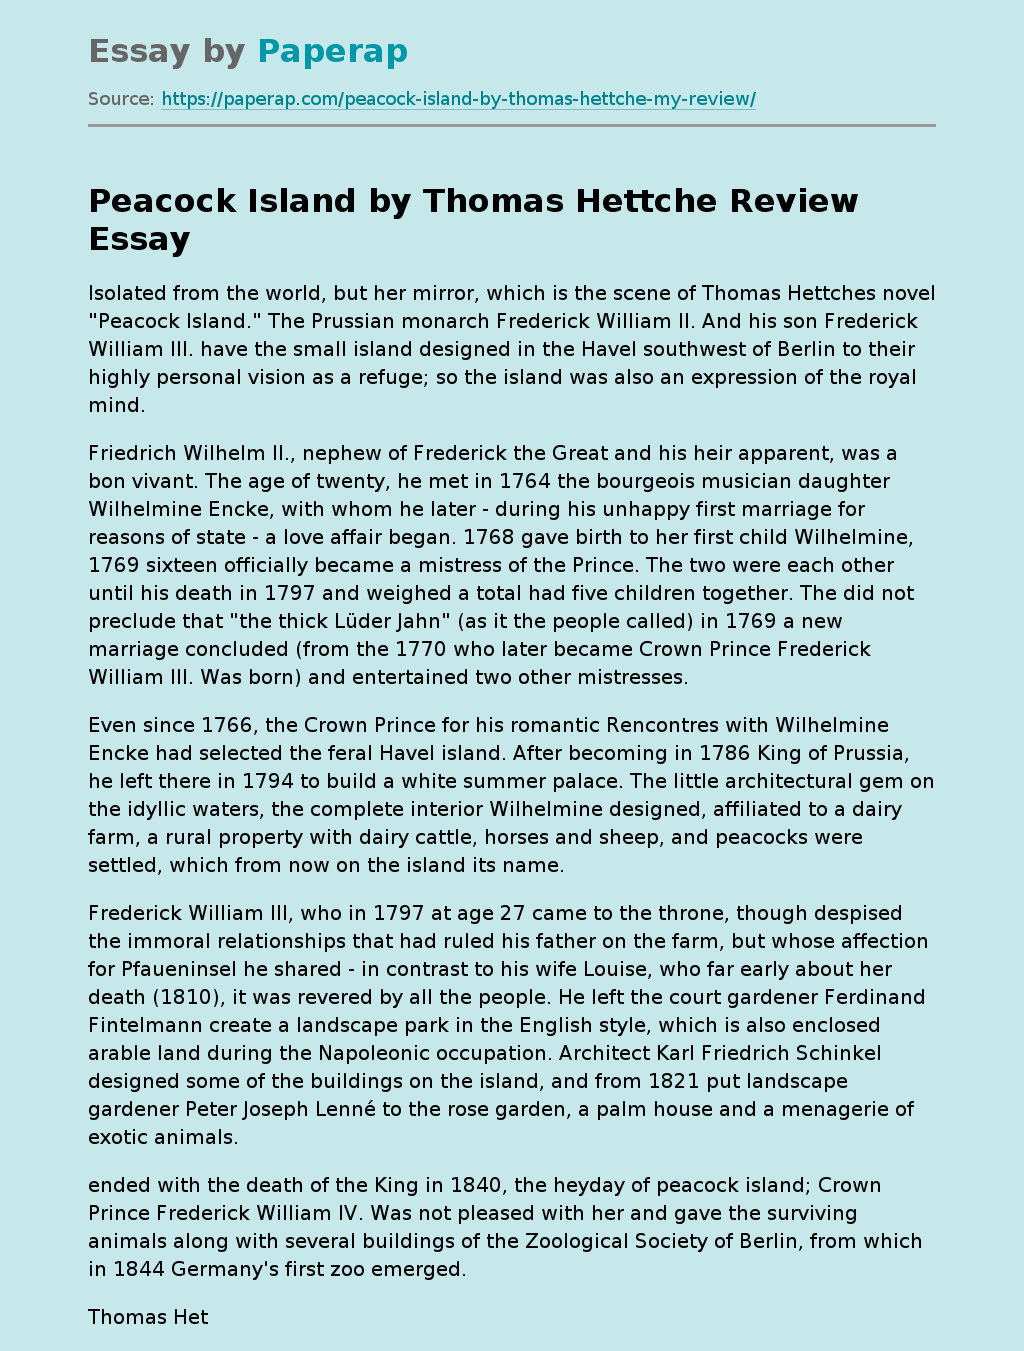 Peacock Island by Thomas Hettche Review